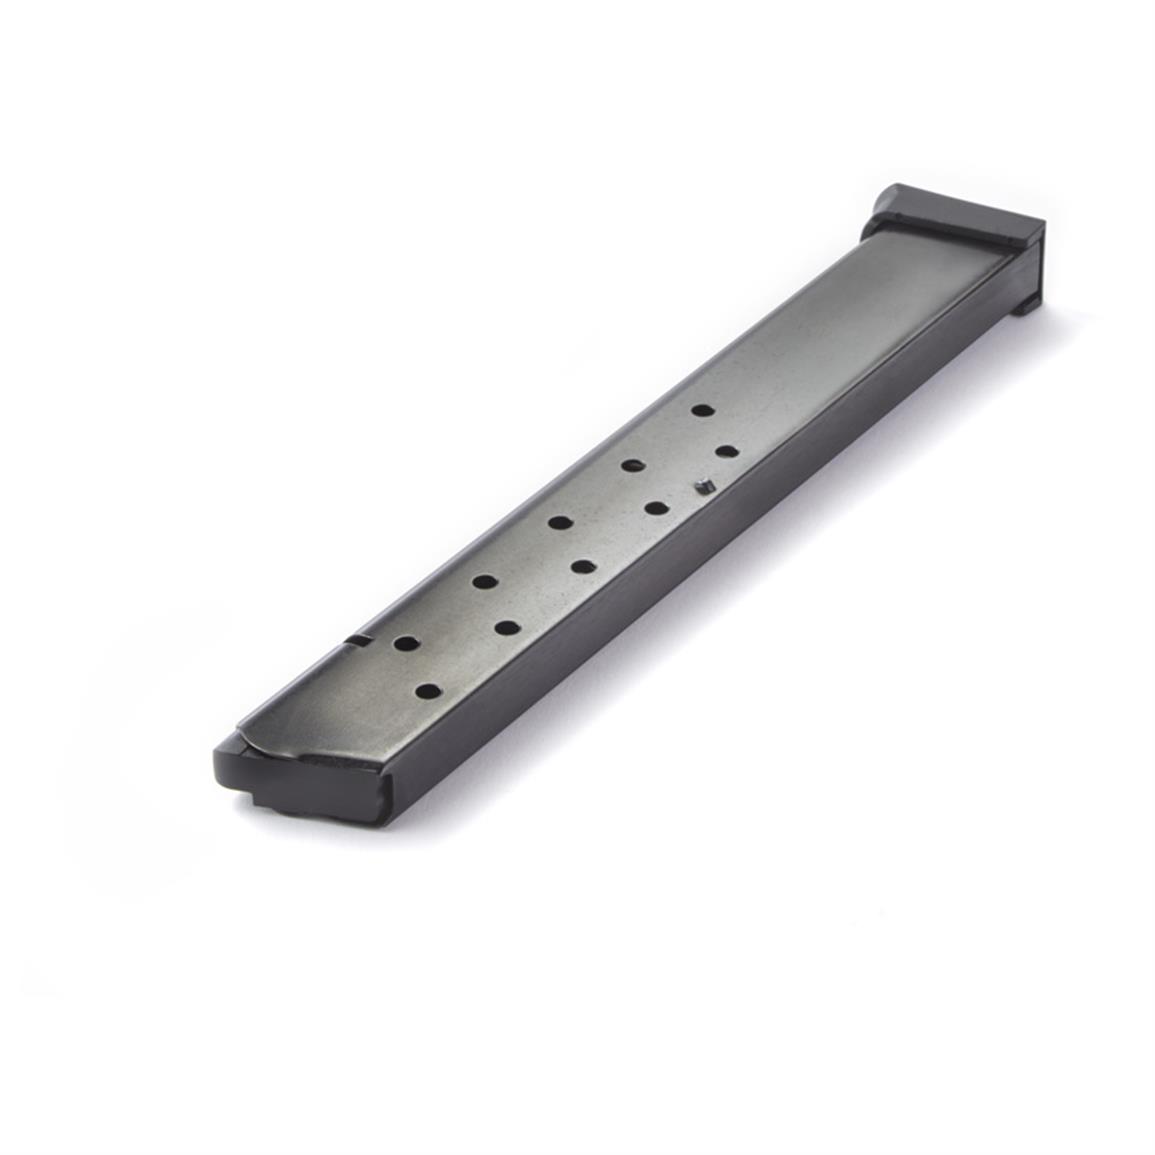 ProMag COL 04 1911 Full Size .45 ACP Magazine 10 Rounds Blued Steel for sale online 